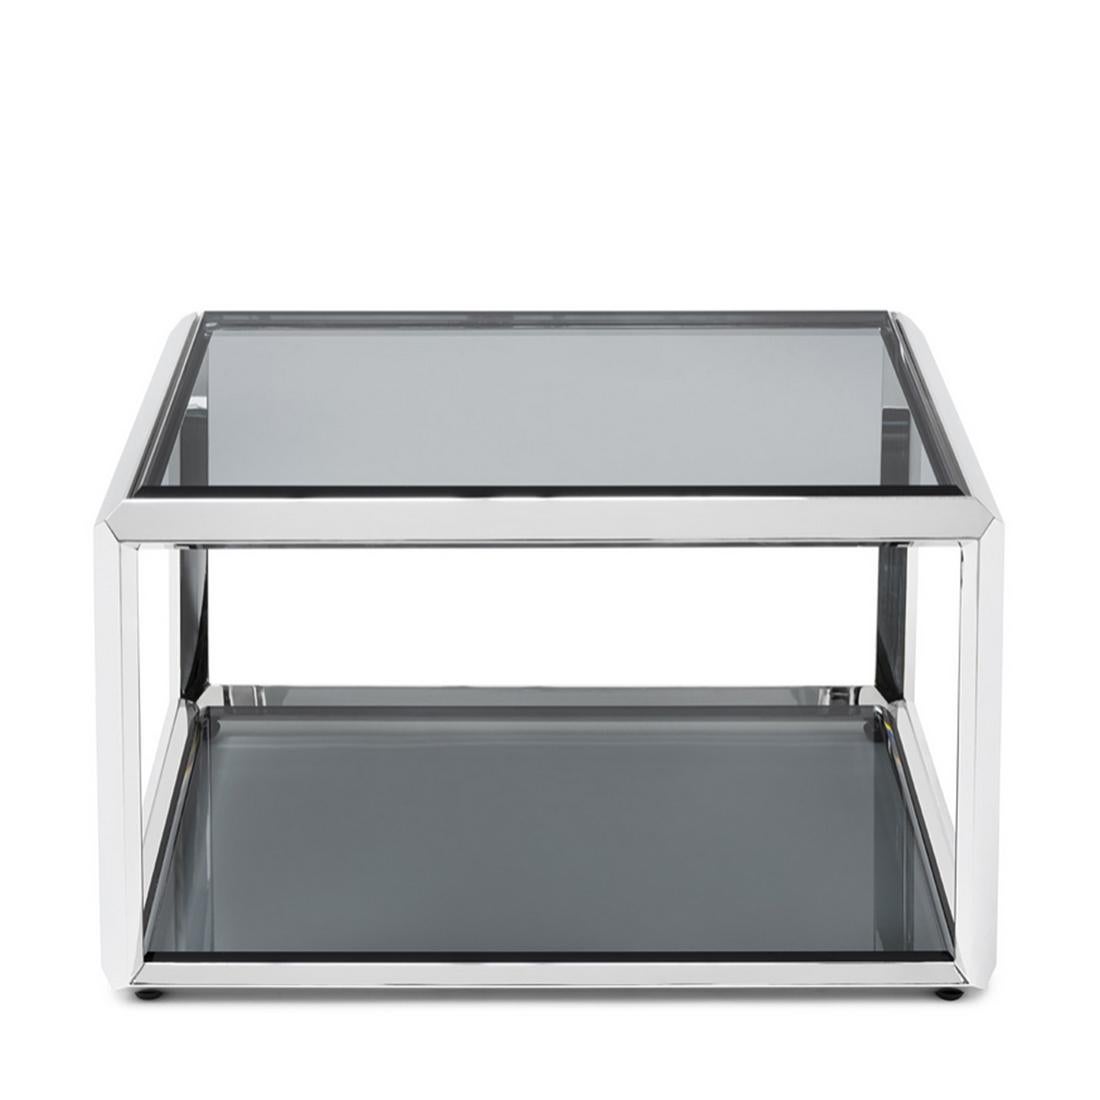 Side table Casiopee chrome with structure in chrome finish,
with beveled smocked glass top up and down the coffee table.